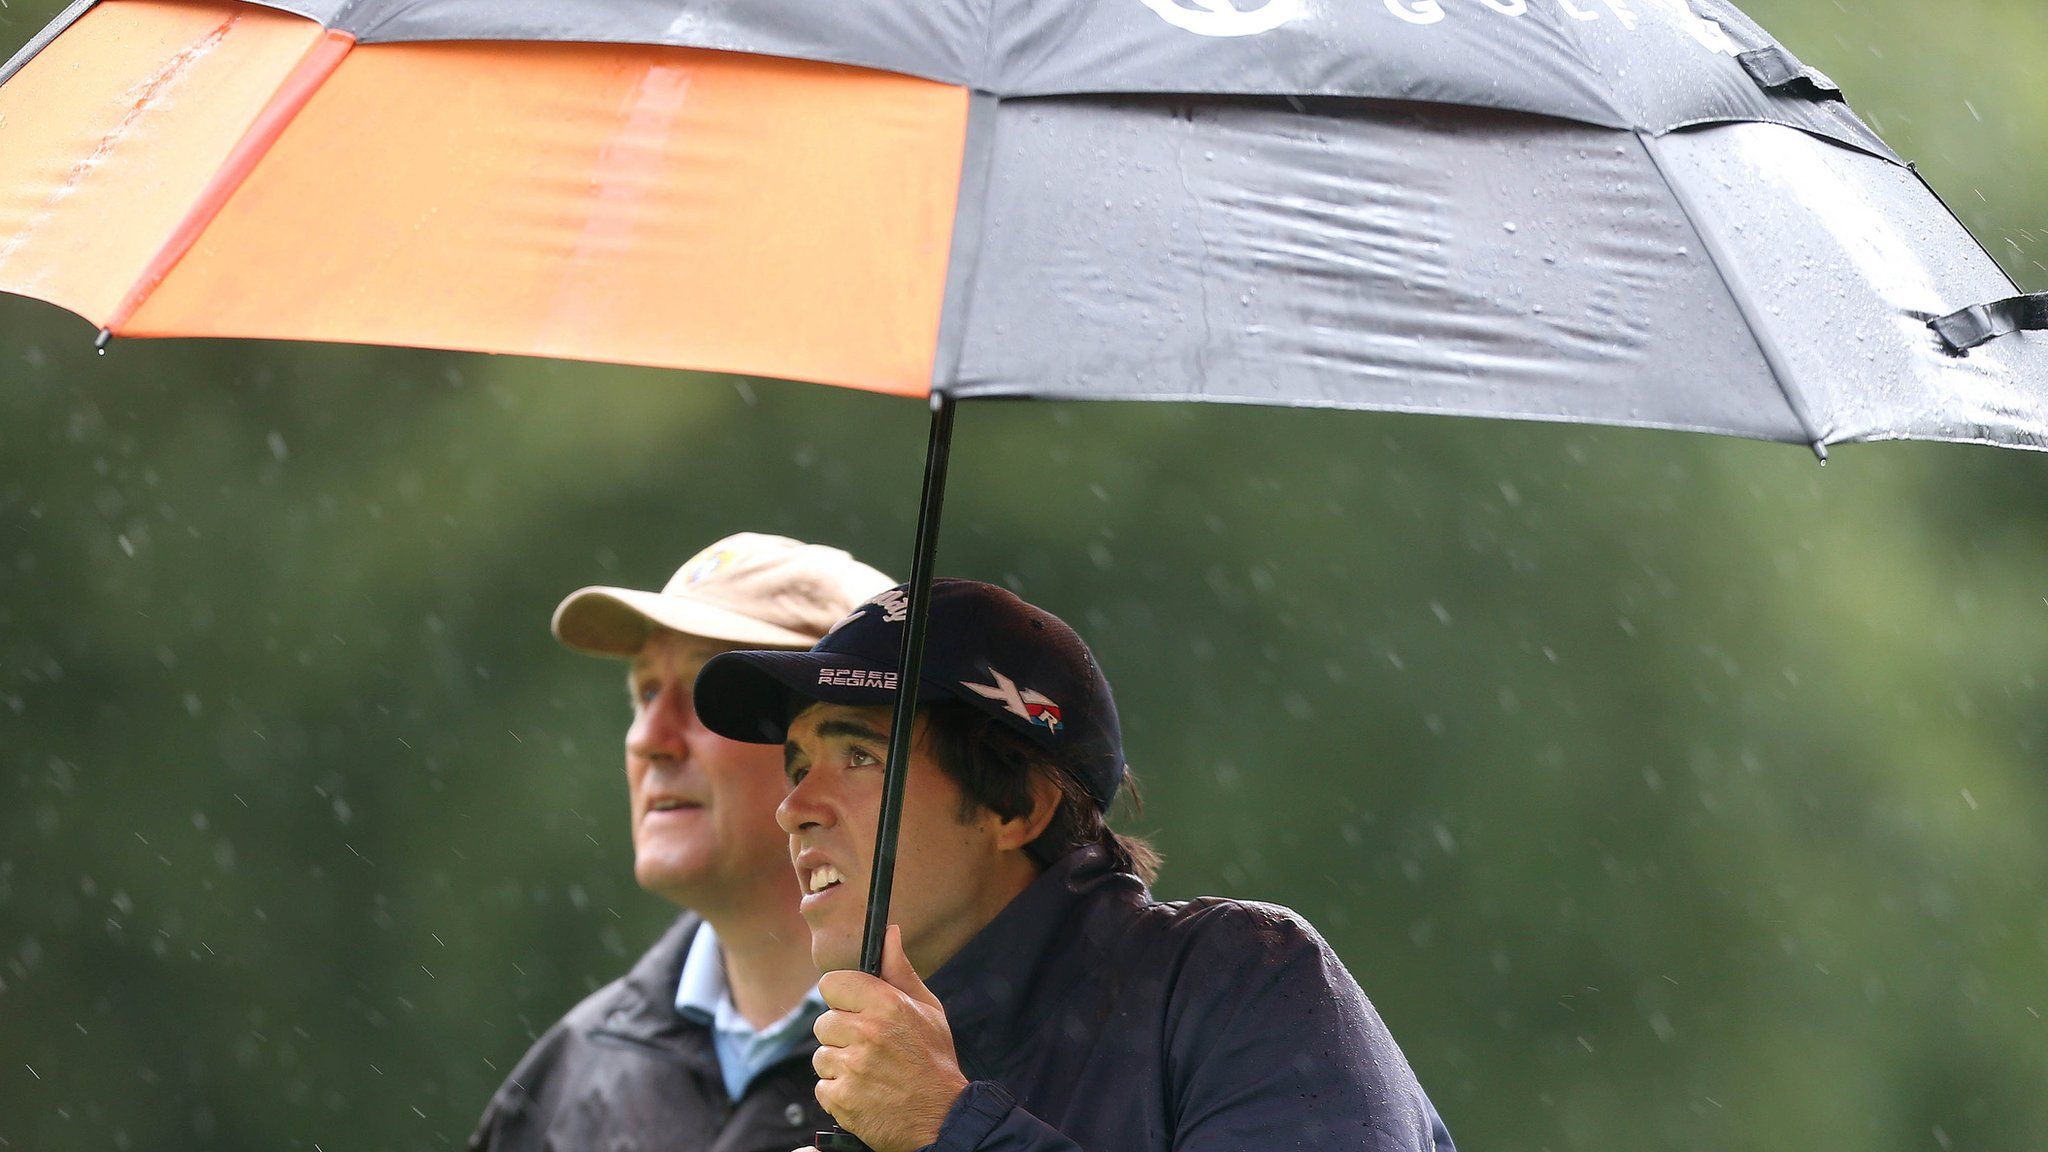 Heavy rain has caused as delay to the start of the first round at Galgorm Castle